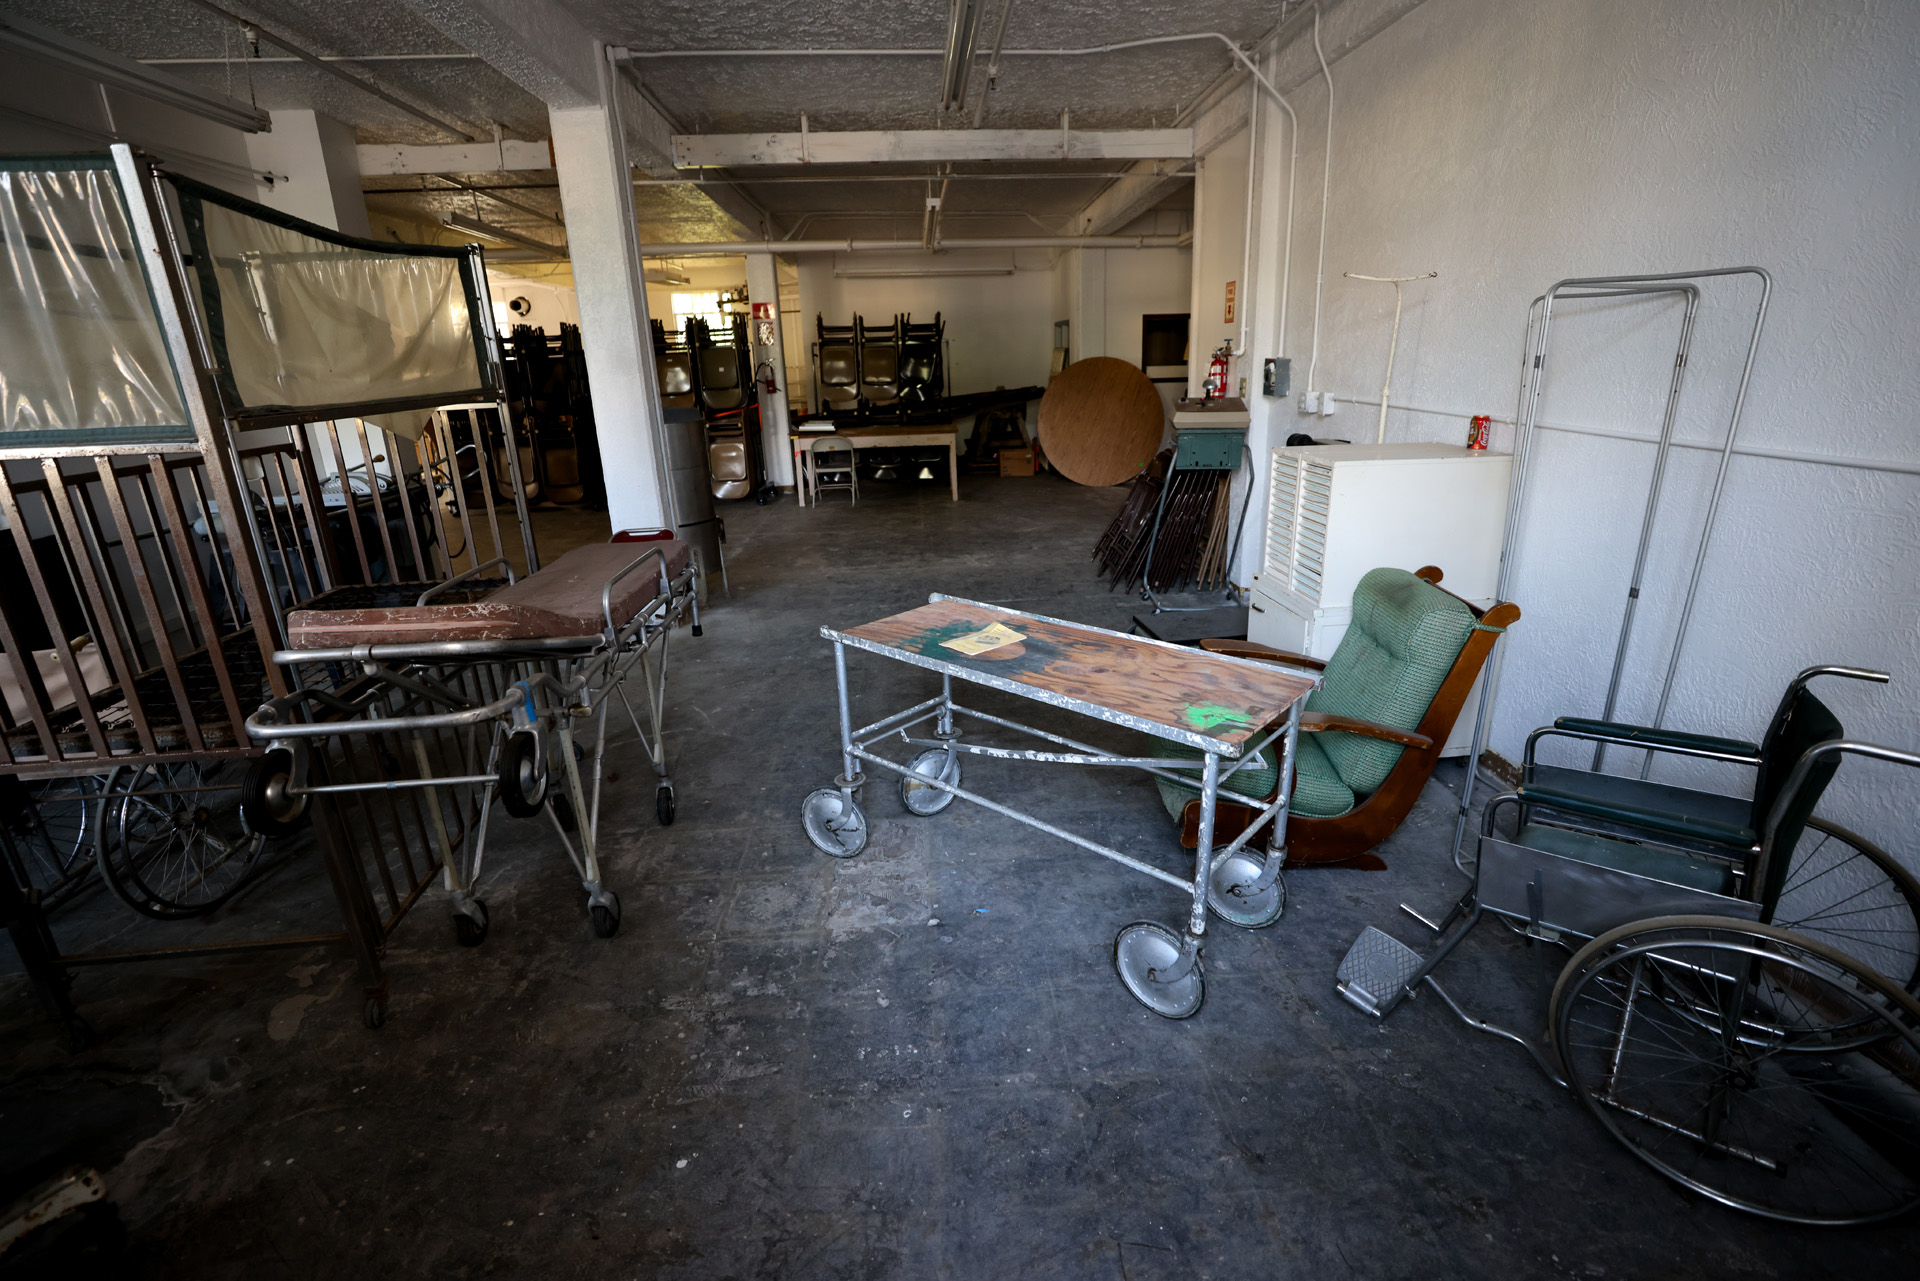 <p>What appears to be a gurney, stretcher and crib sit in the basement of Northern State Hospital. (Karen Ducey / The Seattle Times)</p>
